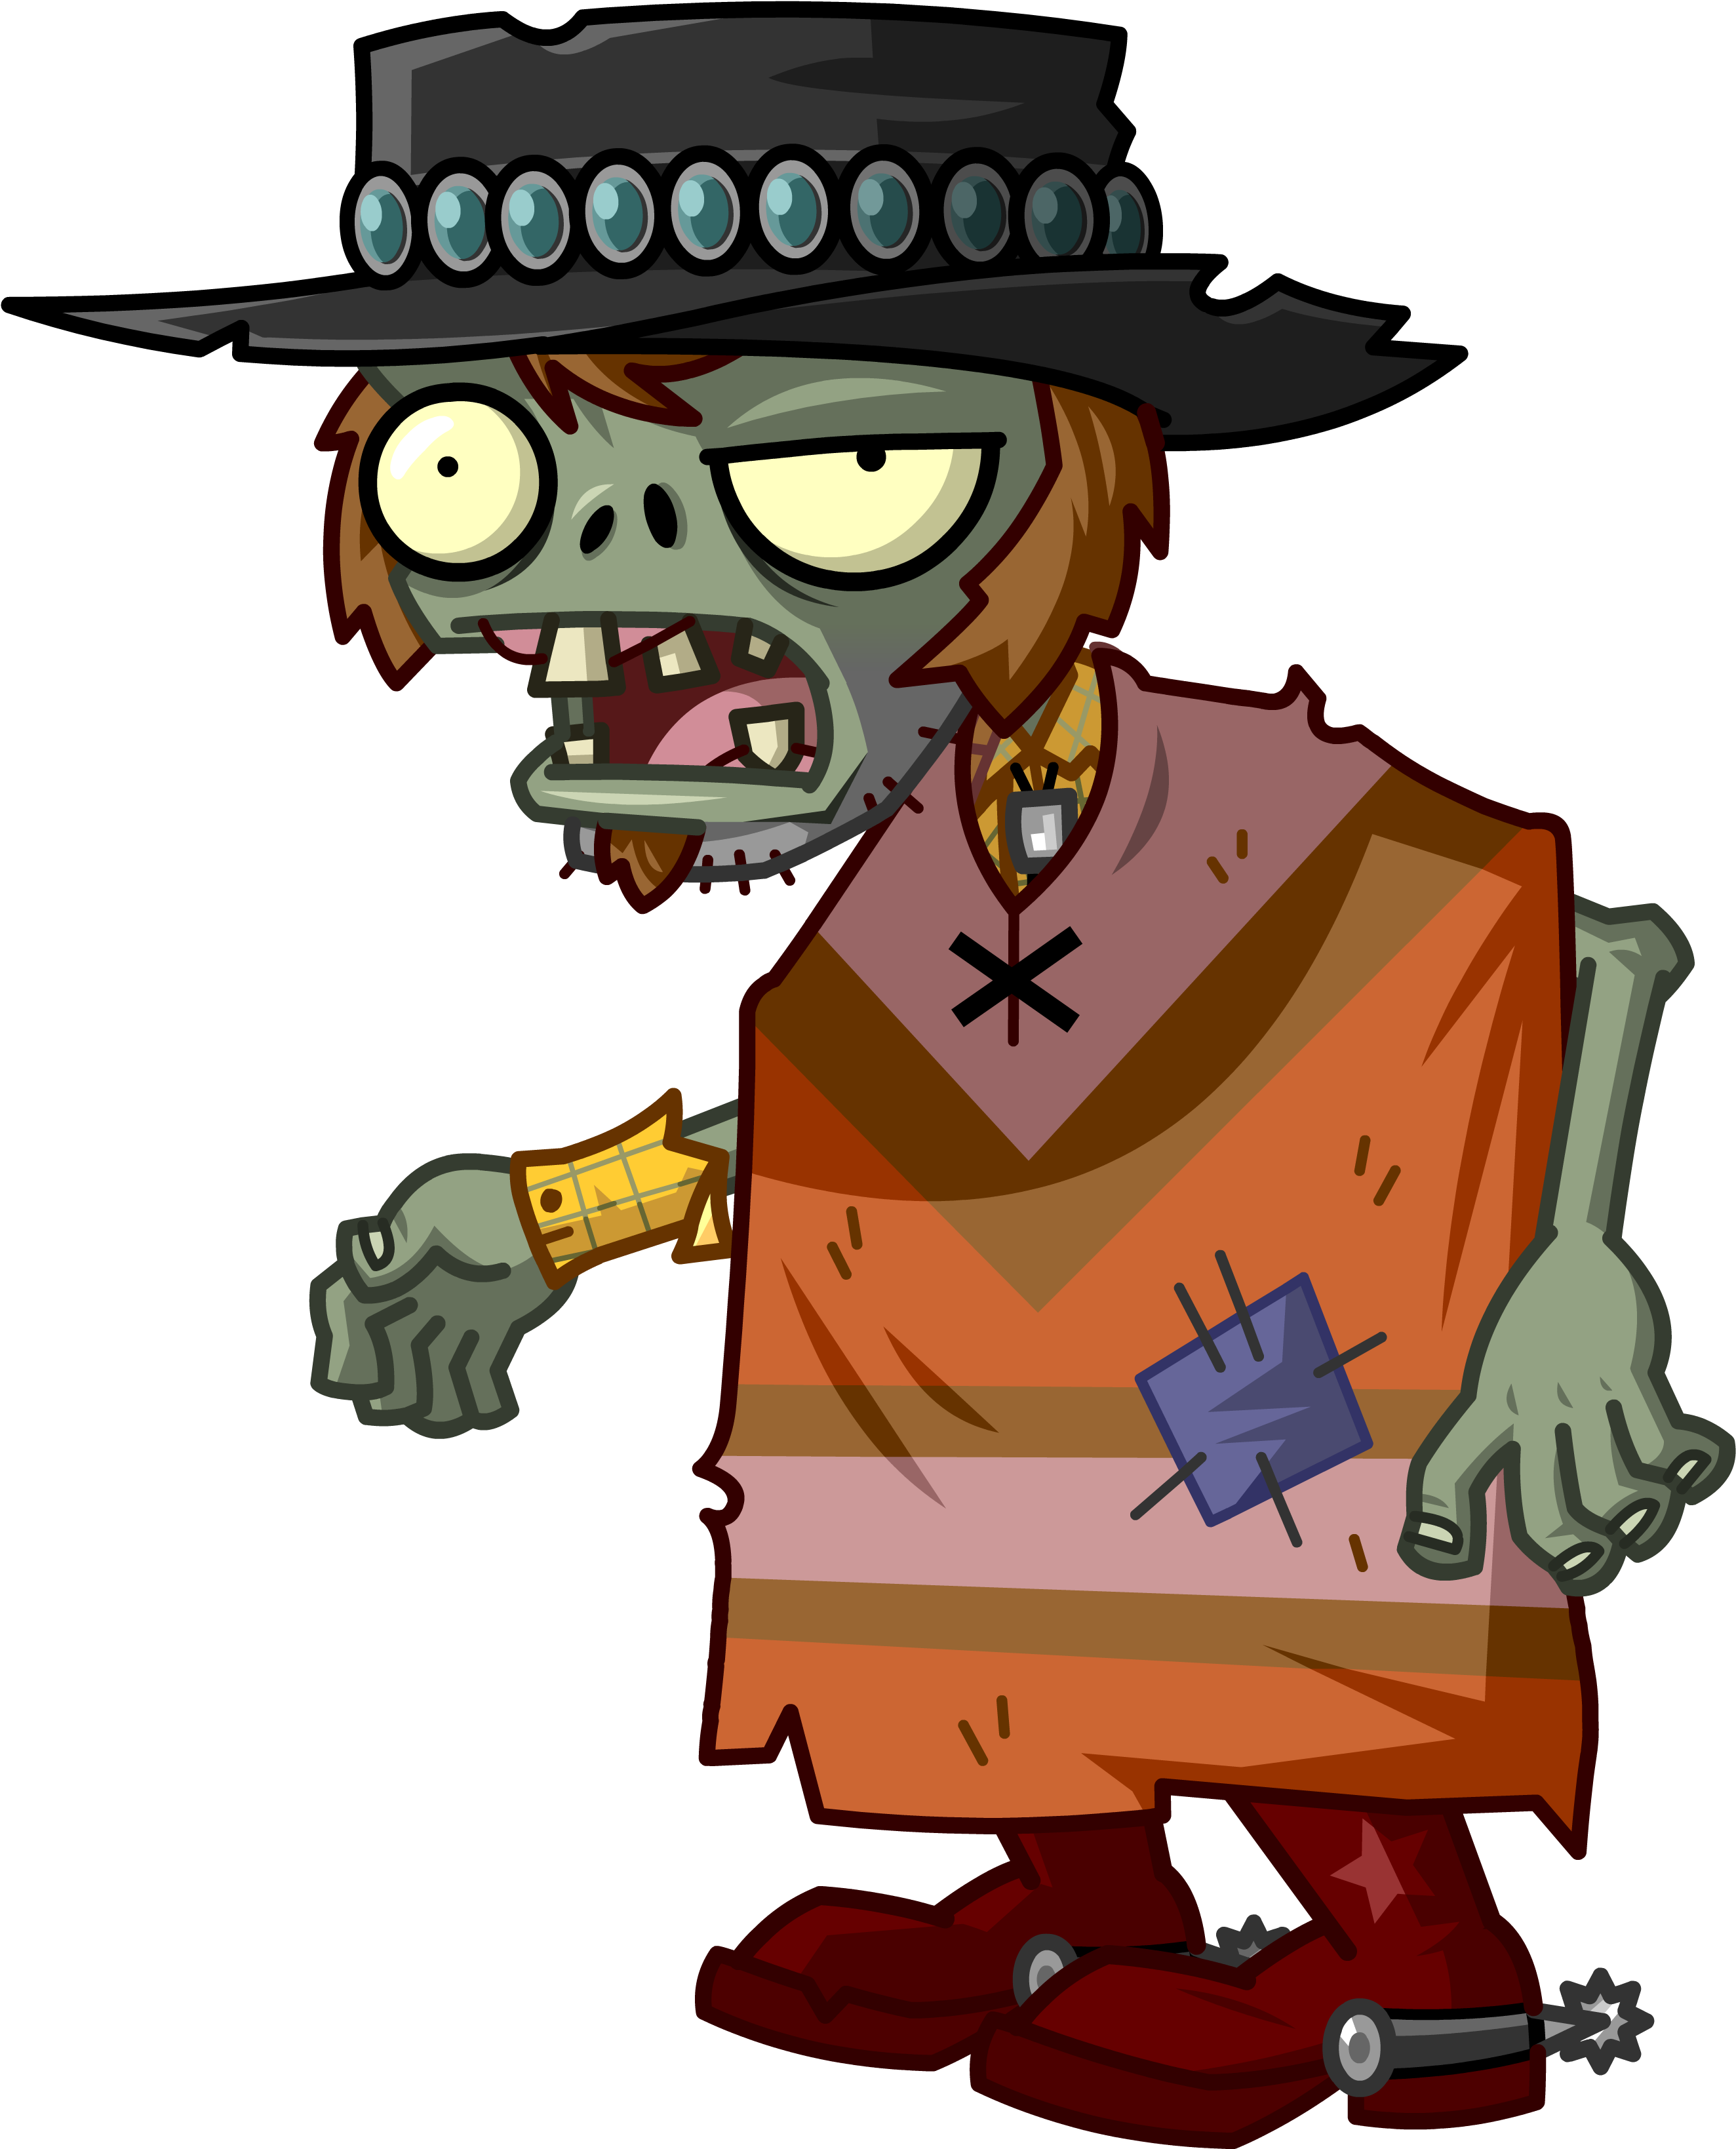 Showing > Basic Zombie Plants Vs Zombies - Plants Vs Zombies 2 All Zombies (2816x3382)